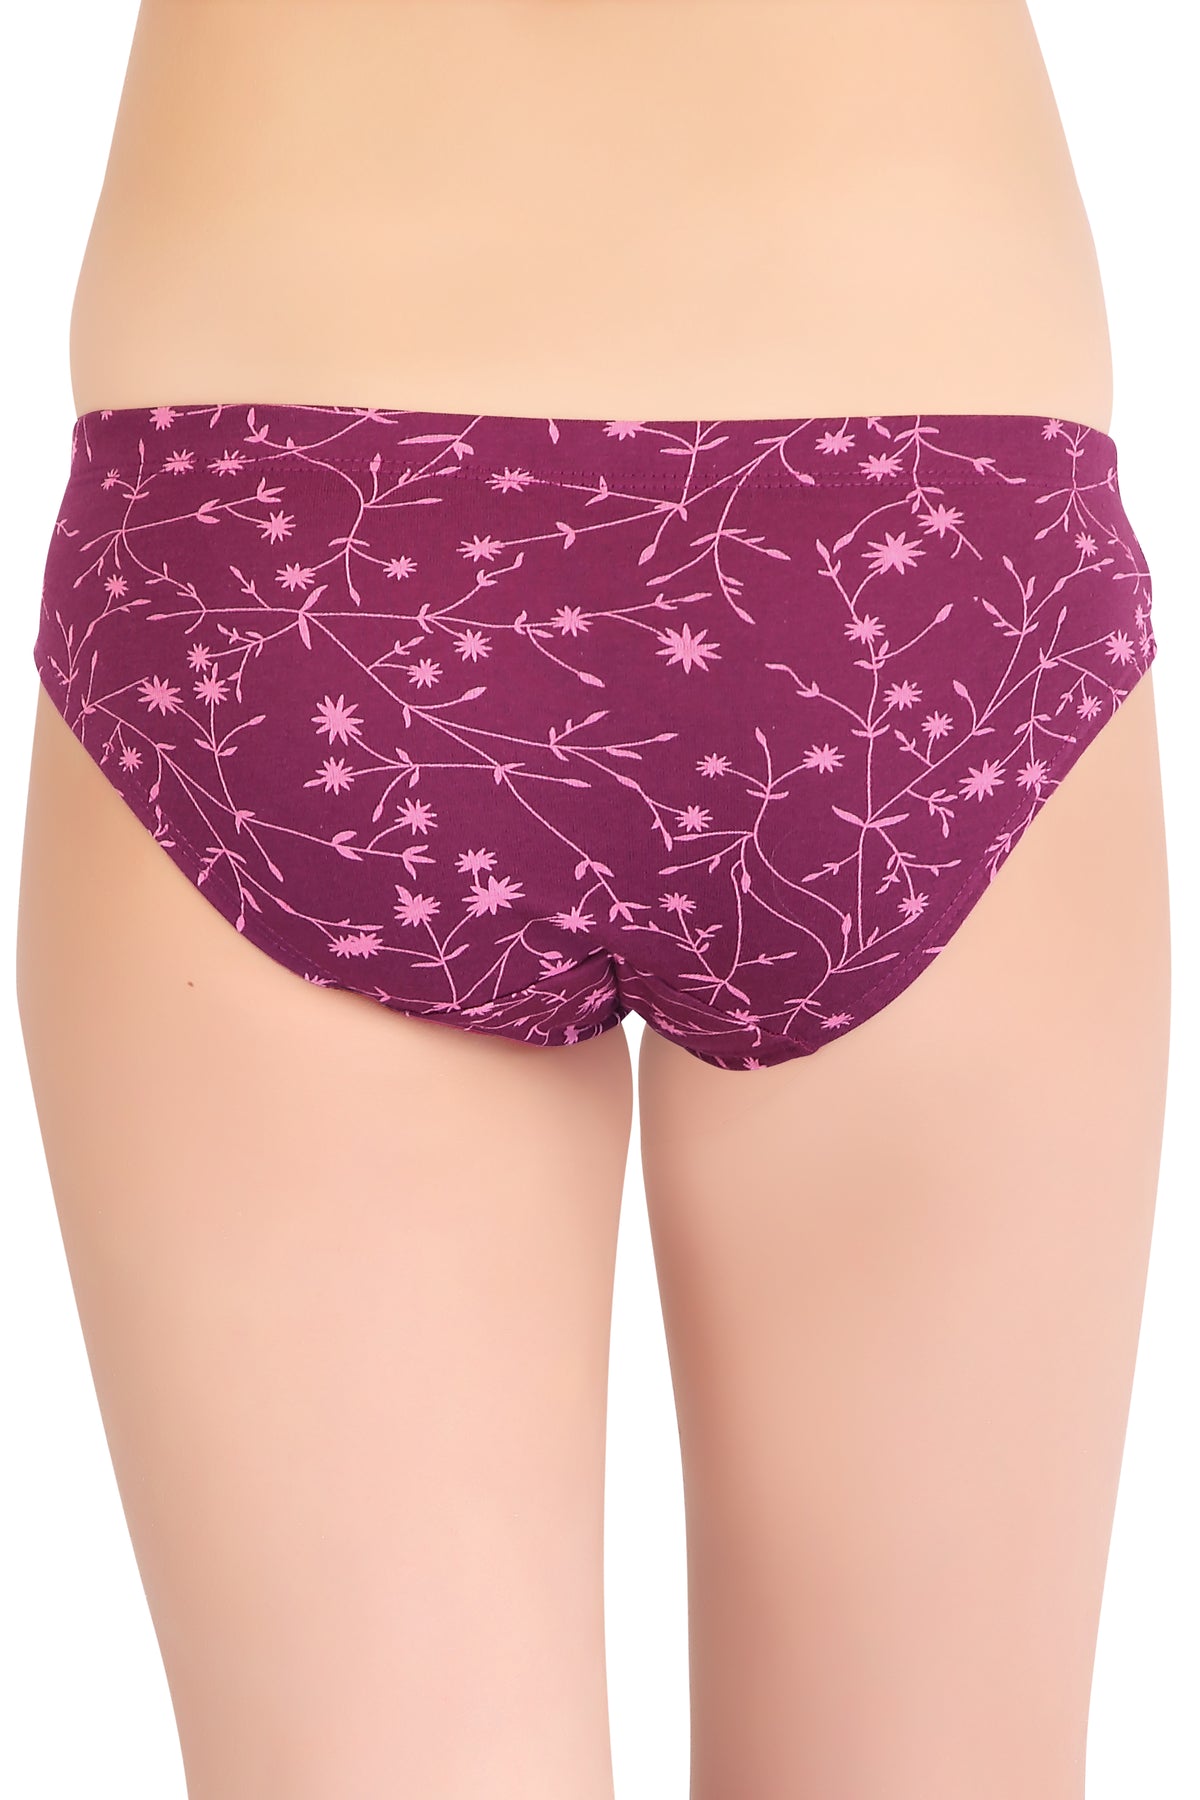 Relaxed Fit Everyday Multicolor printed Hipsters for Teenage Girls Panty